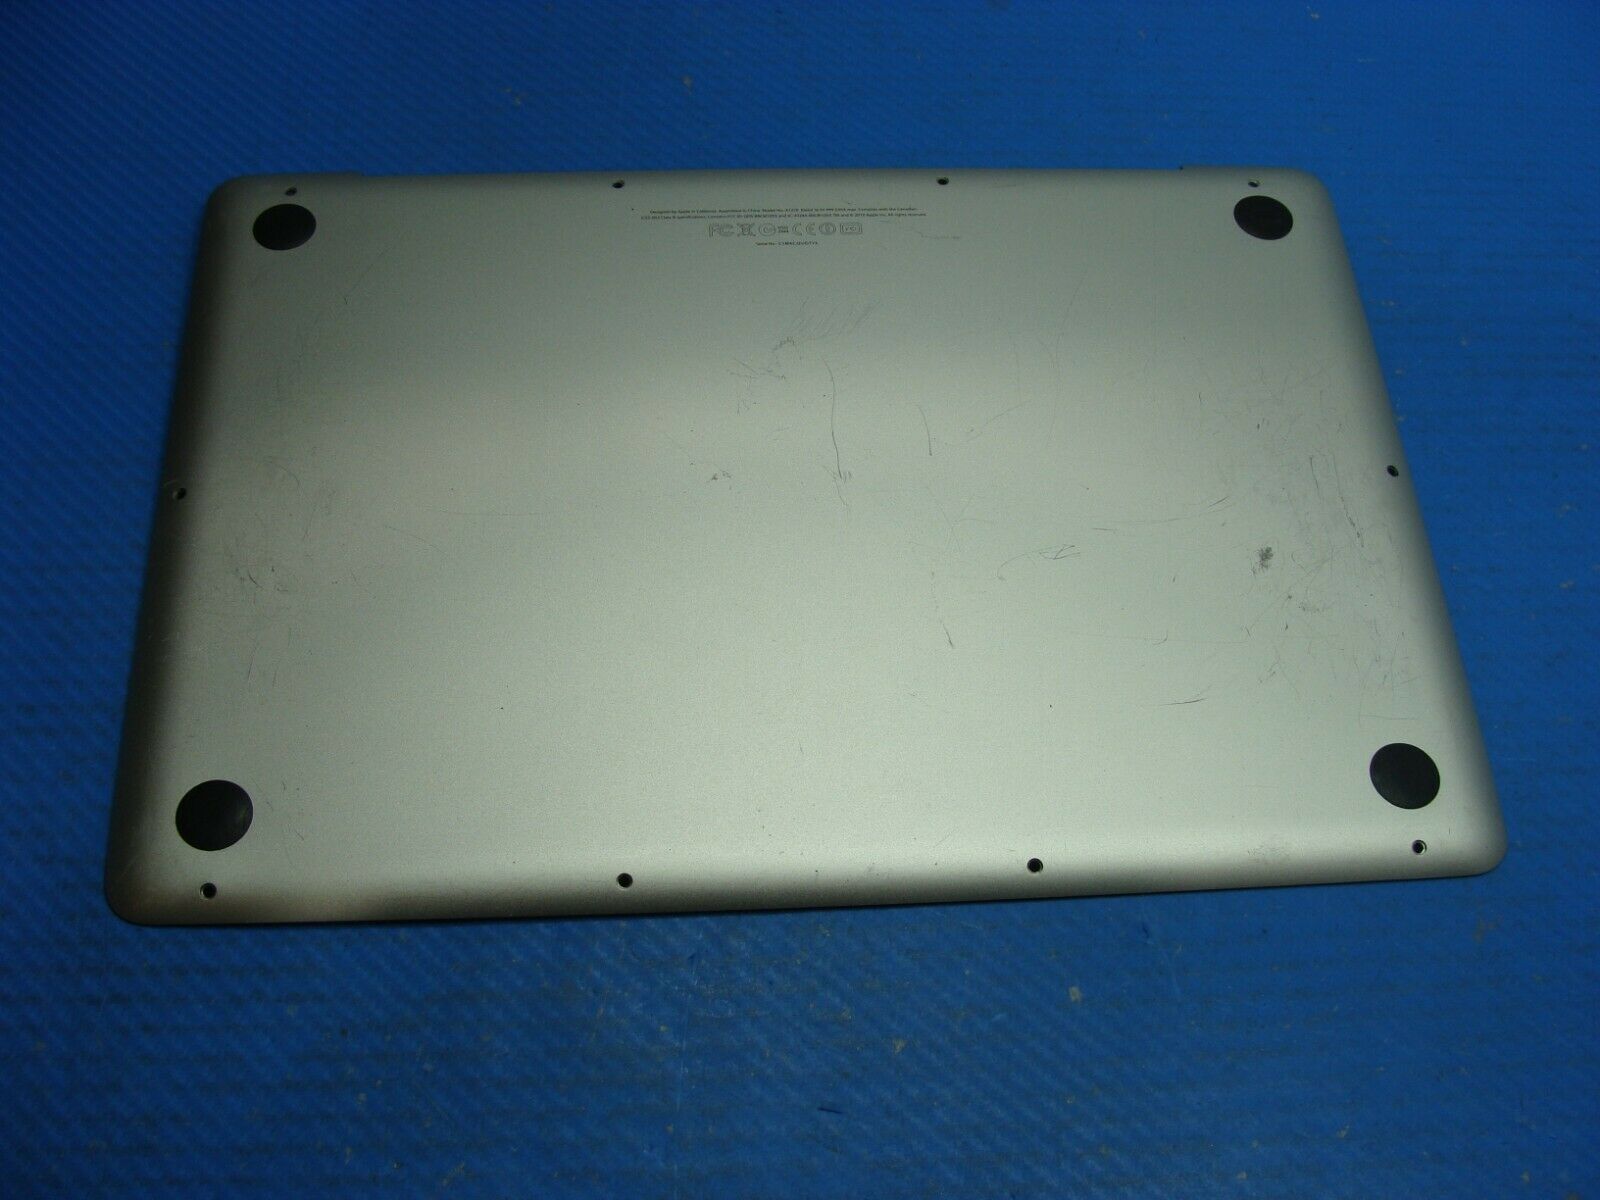 MacBook Pro A1278 13" Mid 2012 MD101LL/A Bottom Case 923-0103 - Laptop Parts - Buy Authentic Computer Parts - Top Seller Ebay